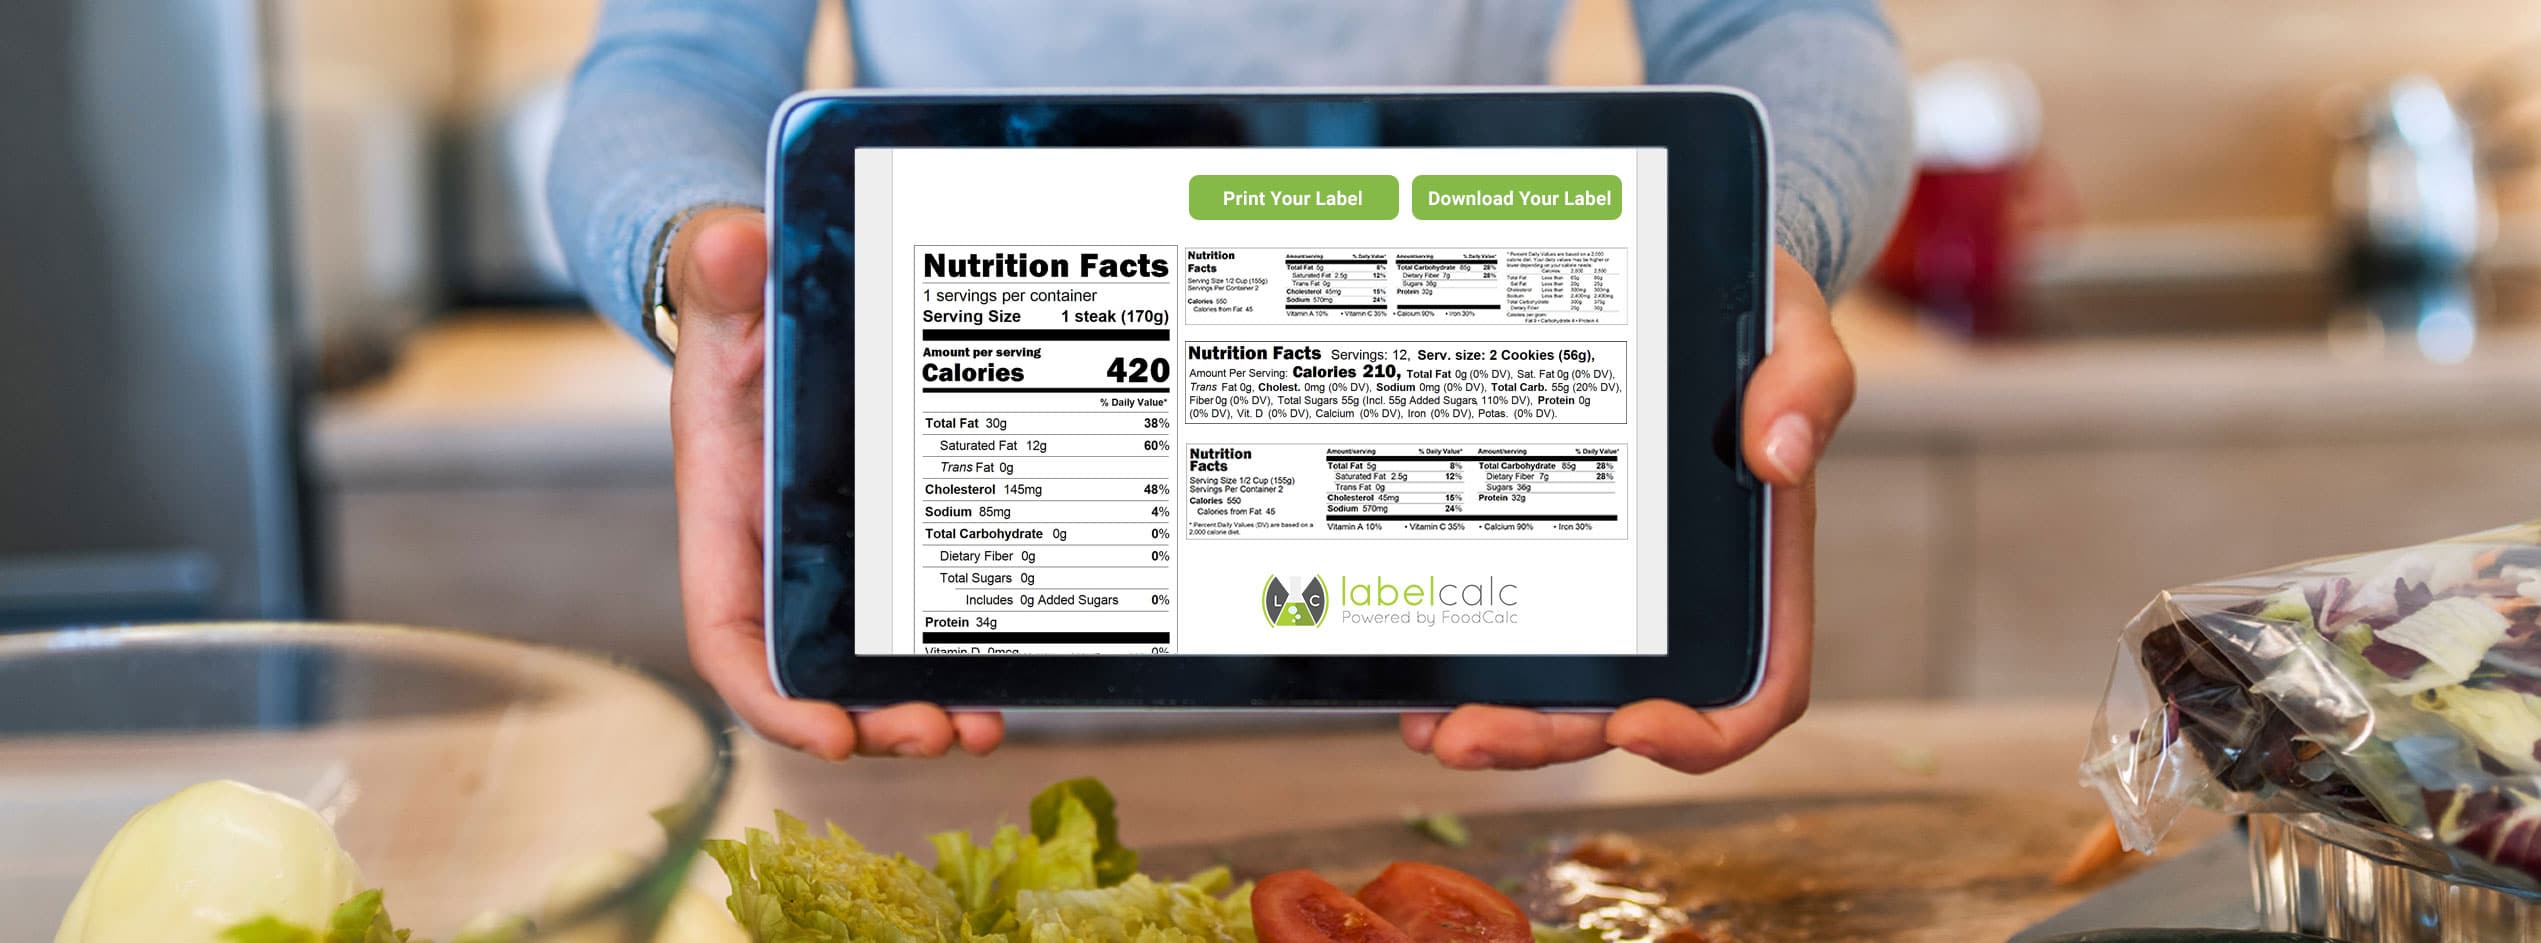 The LabelCalc software helps you create a nutrition facts panel for your food product